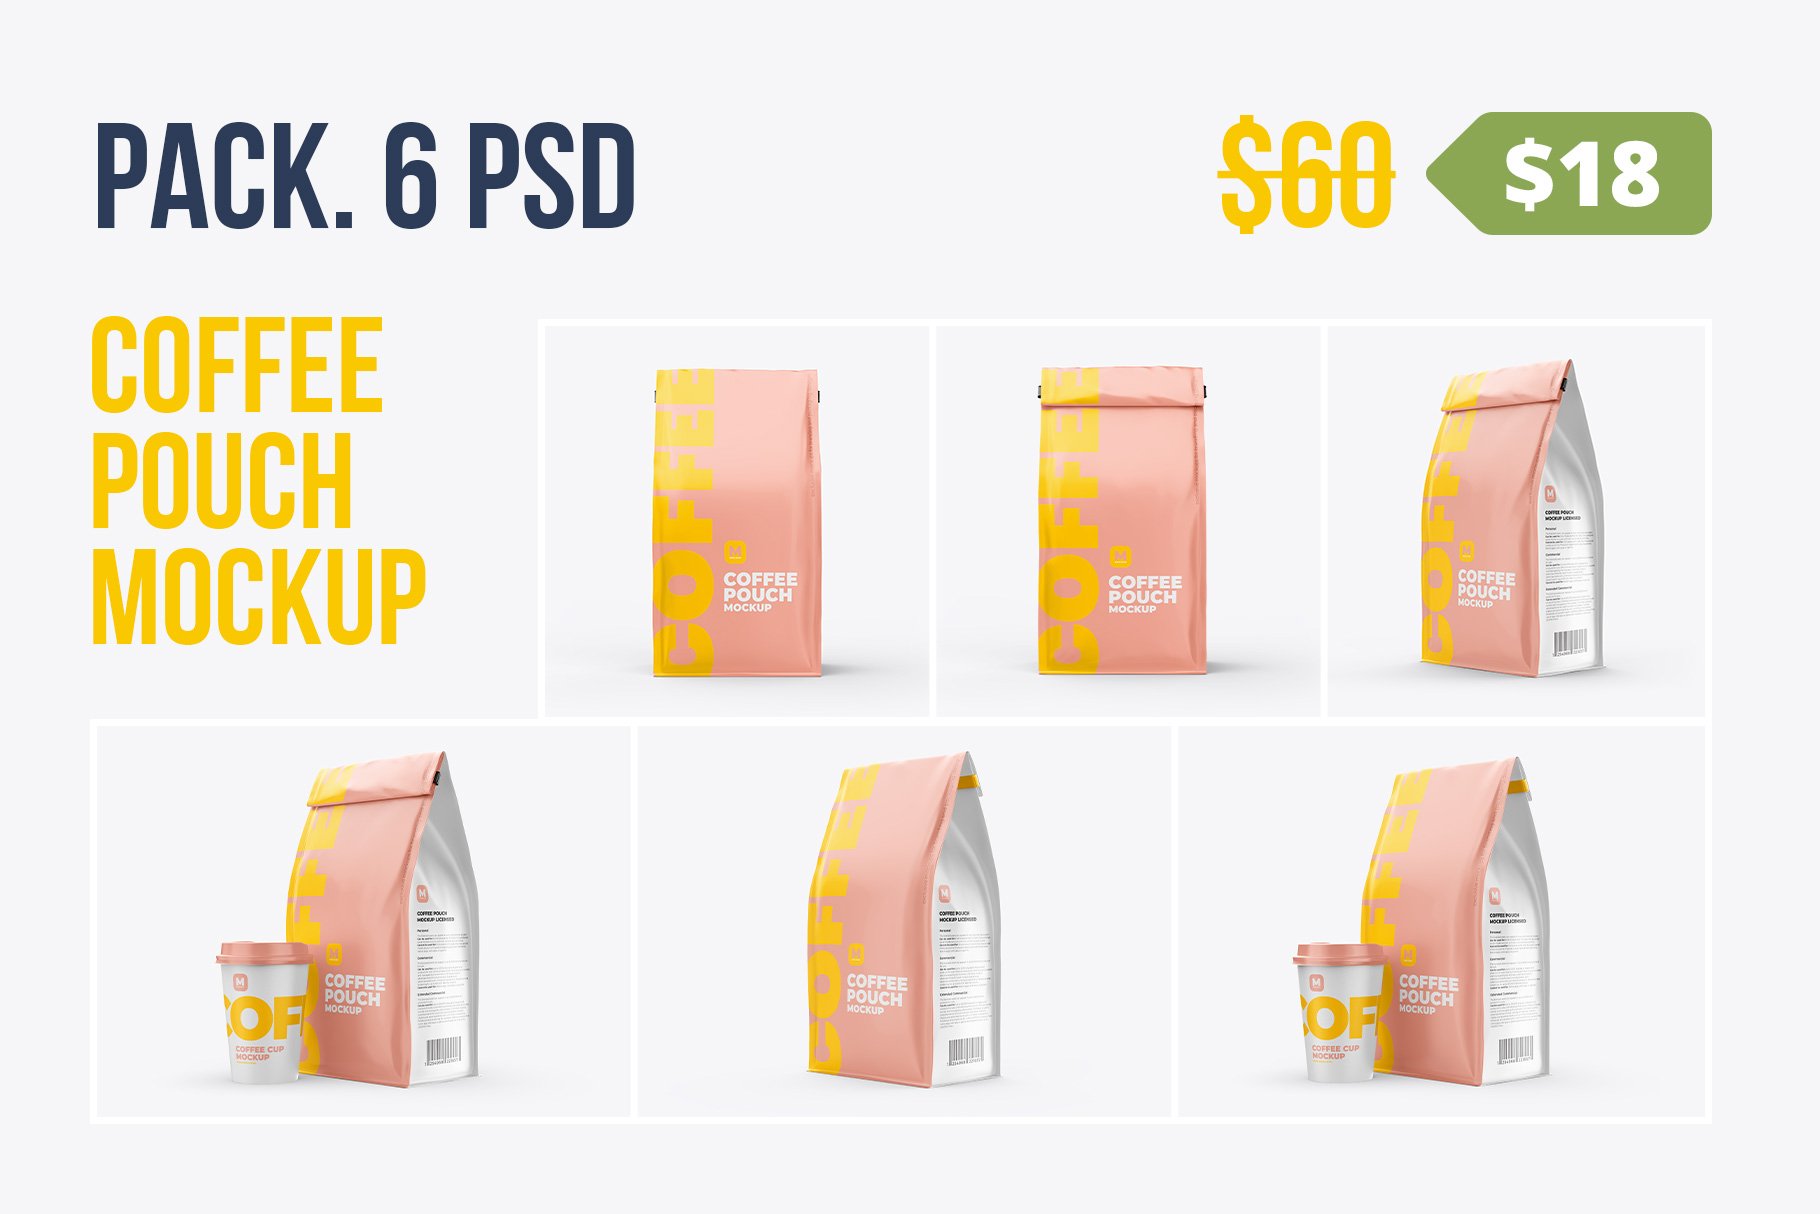 Coffee pouch mockup. Pack 6 PSD cover image.